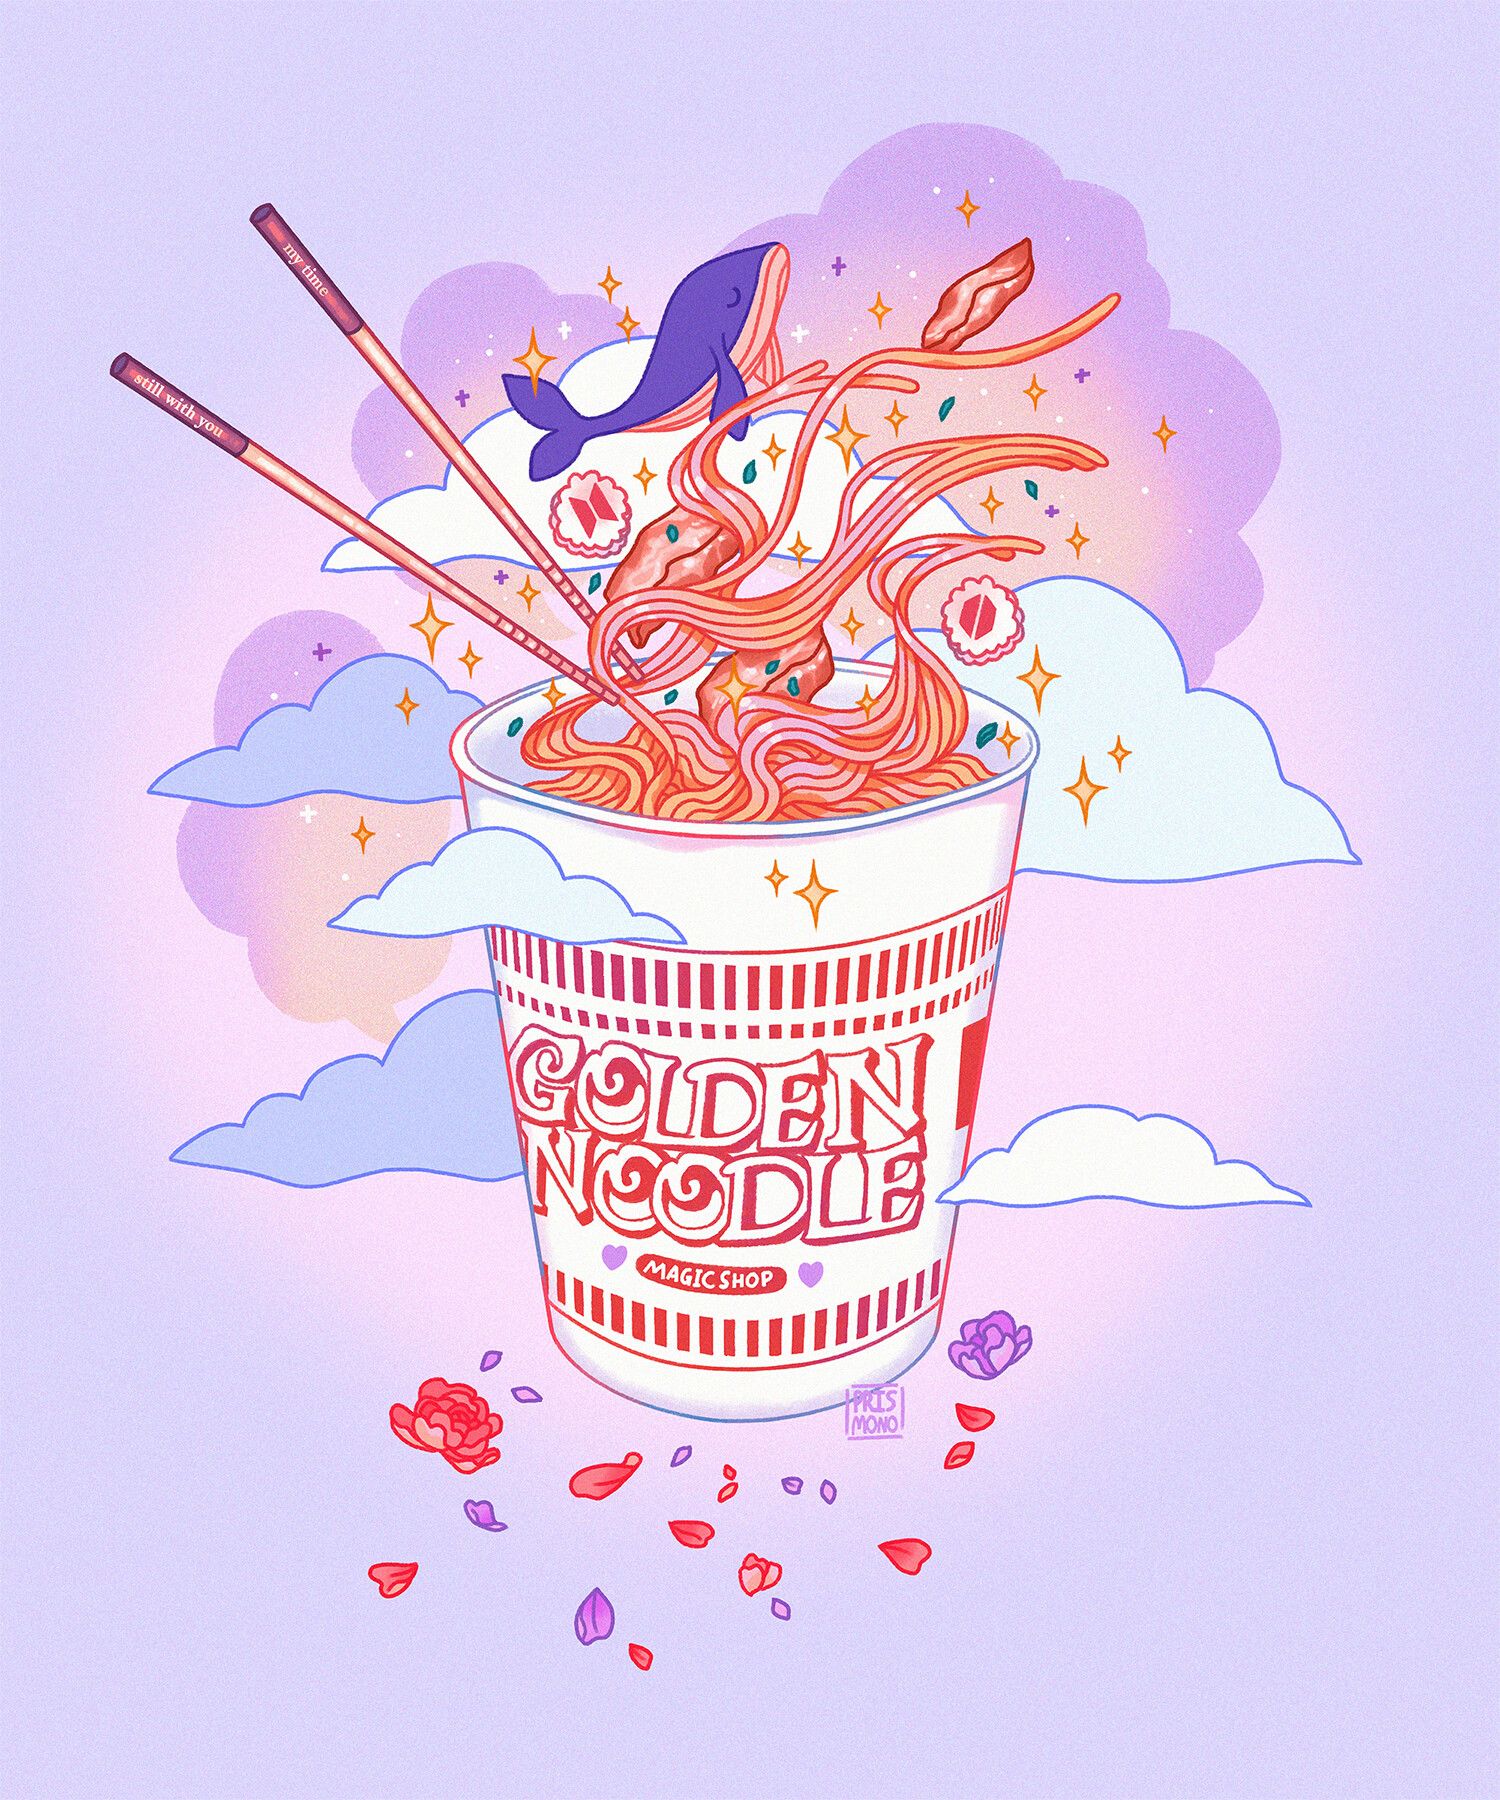 A cup of noodles with chopsticks and clouds - Ramen, school